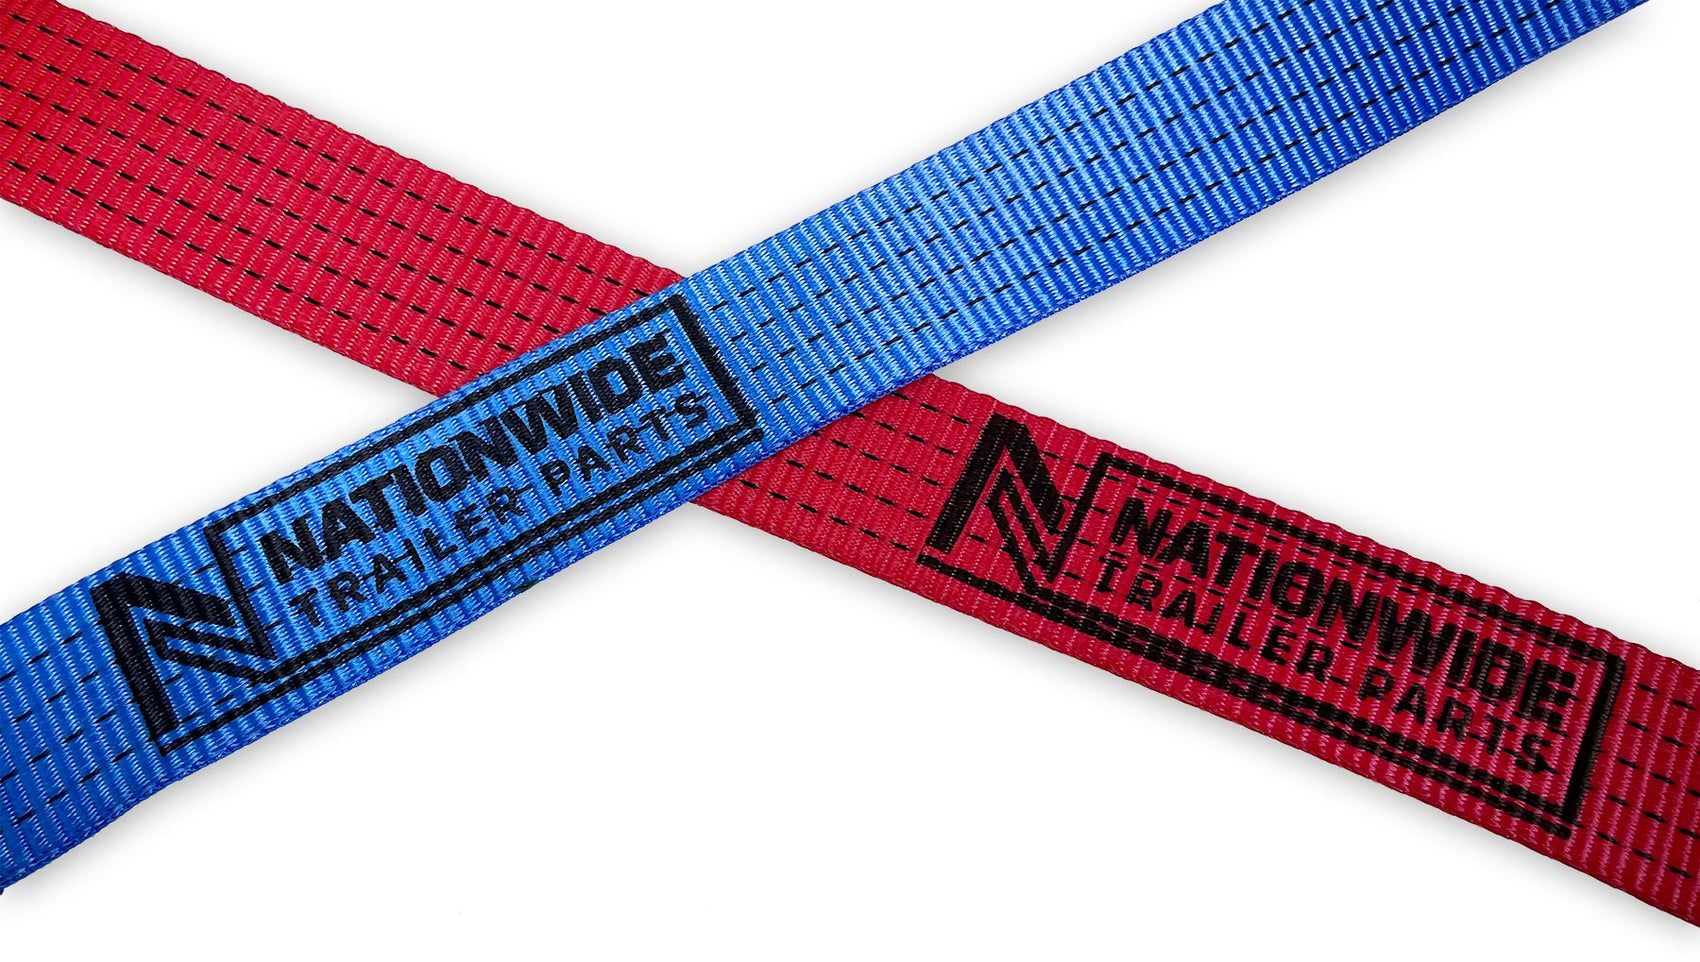 Printed Ratchet Straps with Your Own Logo